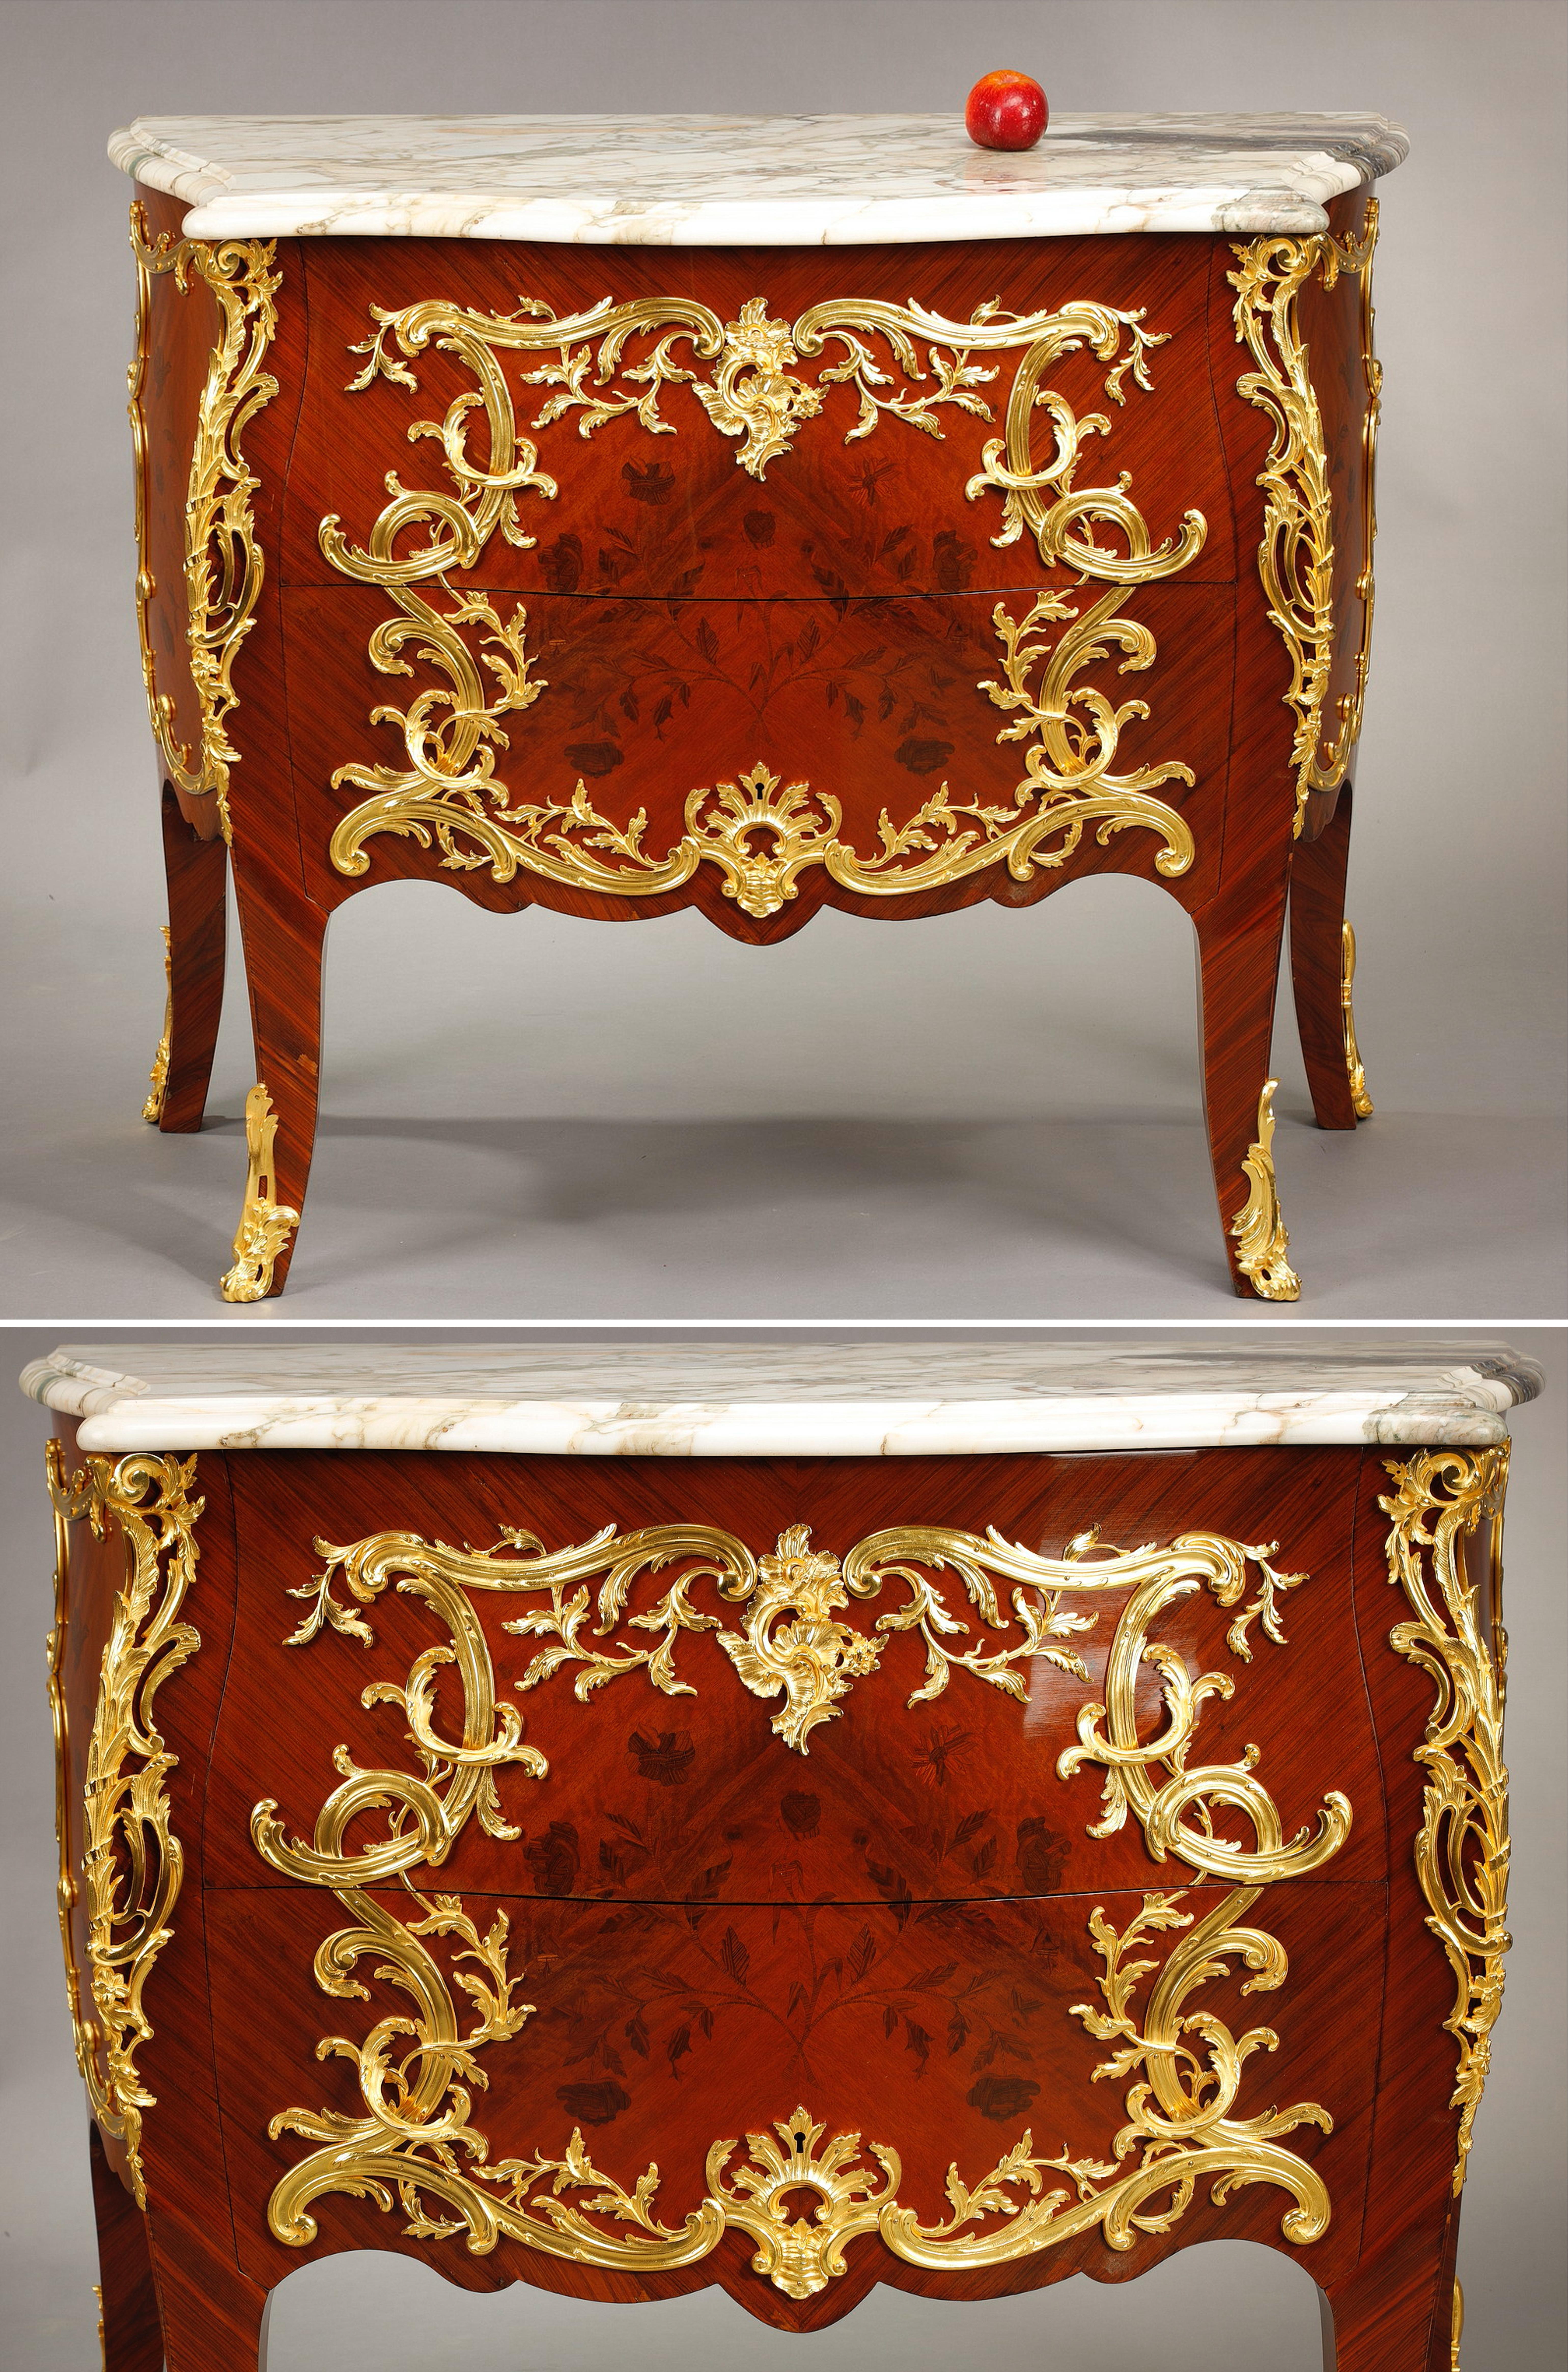 Louis XV style chest of drawers with wood marquetry, decorated with gilt bronzes. It is decorated with marquetry of branches and flowers in different wood set in gilt bronze rocaille cartouches. The uprights are underlined by elegant openwork falls.